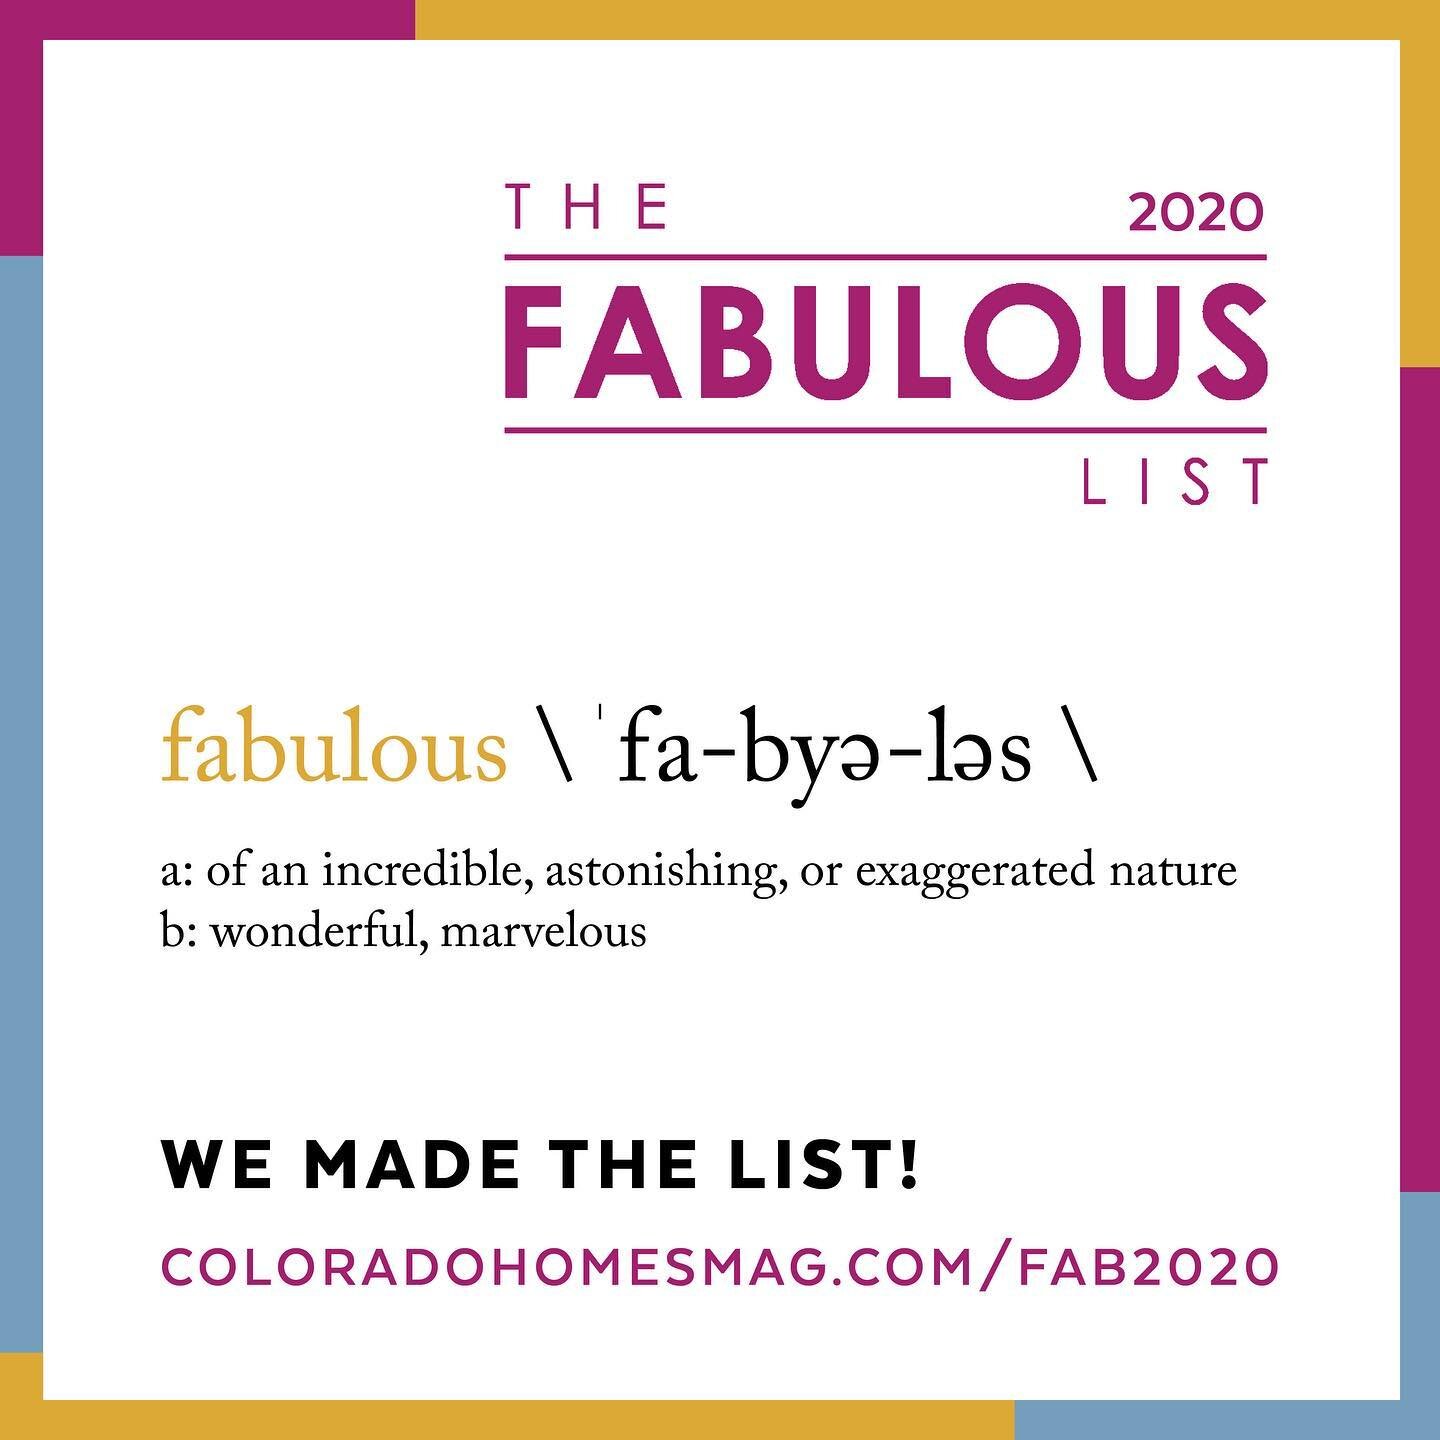 We&rsquo;re FABULOUS! We are proud to be among the honorees on the 2020 Colorado Homes &amp; Lifestyles Fabulous List. See the full article at coloradohomesmag.com/Fab2020. #FabulousList2020 #CHLFabulous